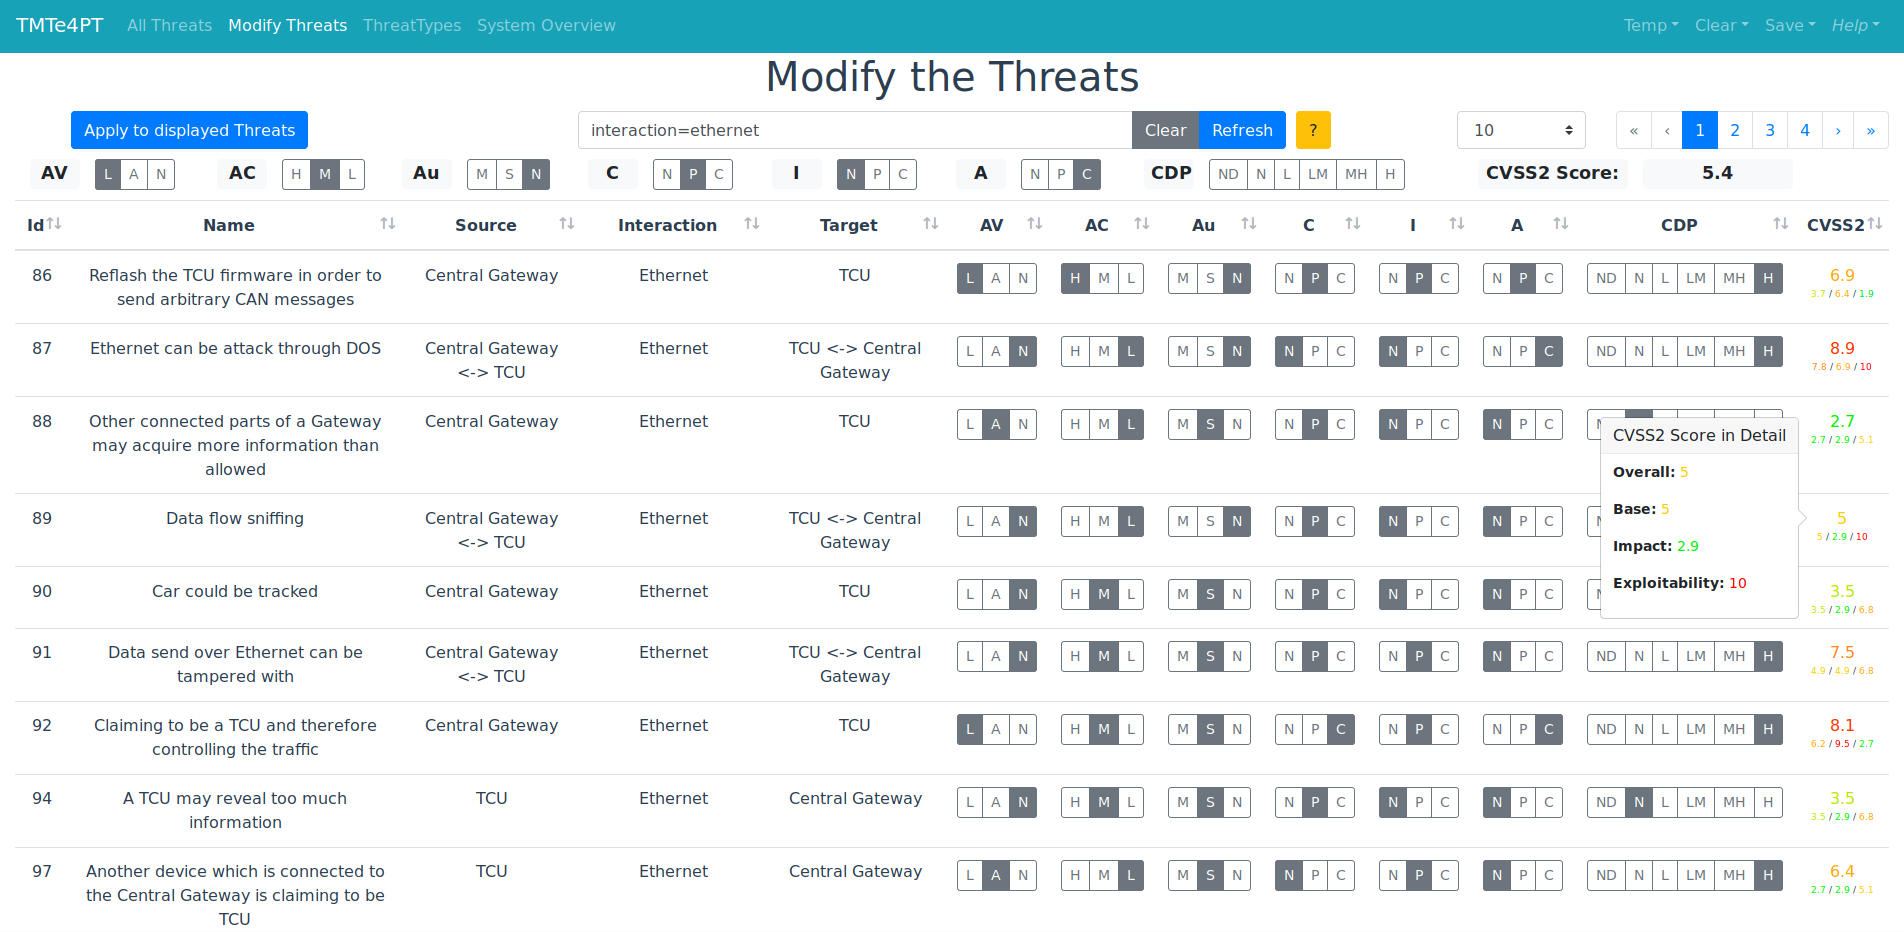 preview-image for Image of the Modify the Threats Tab of the TMTe4PT tool.